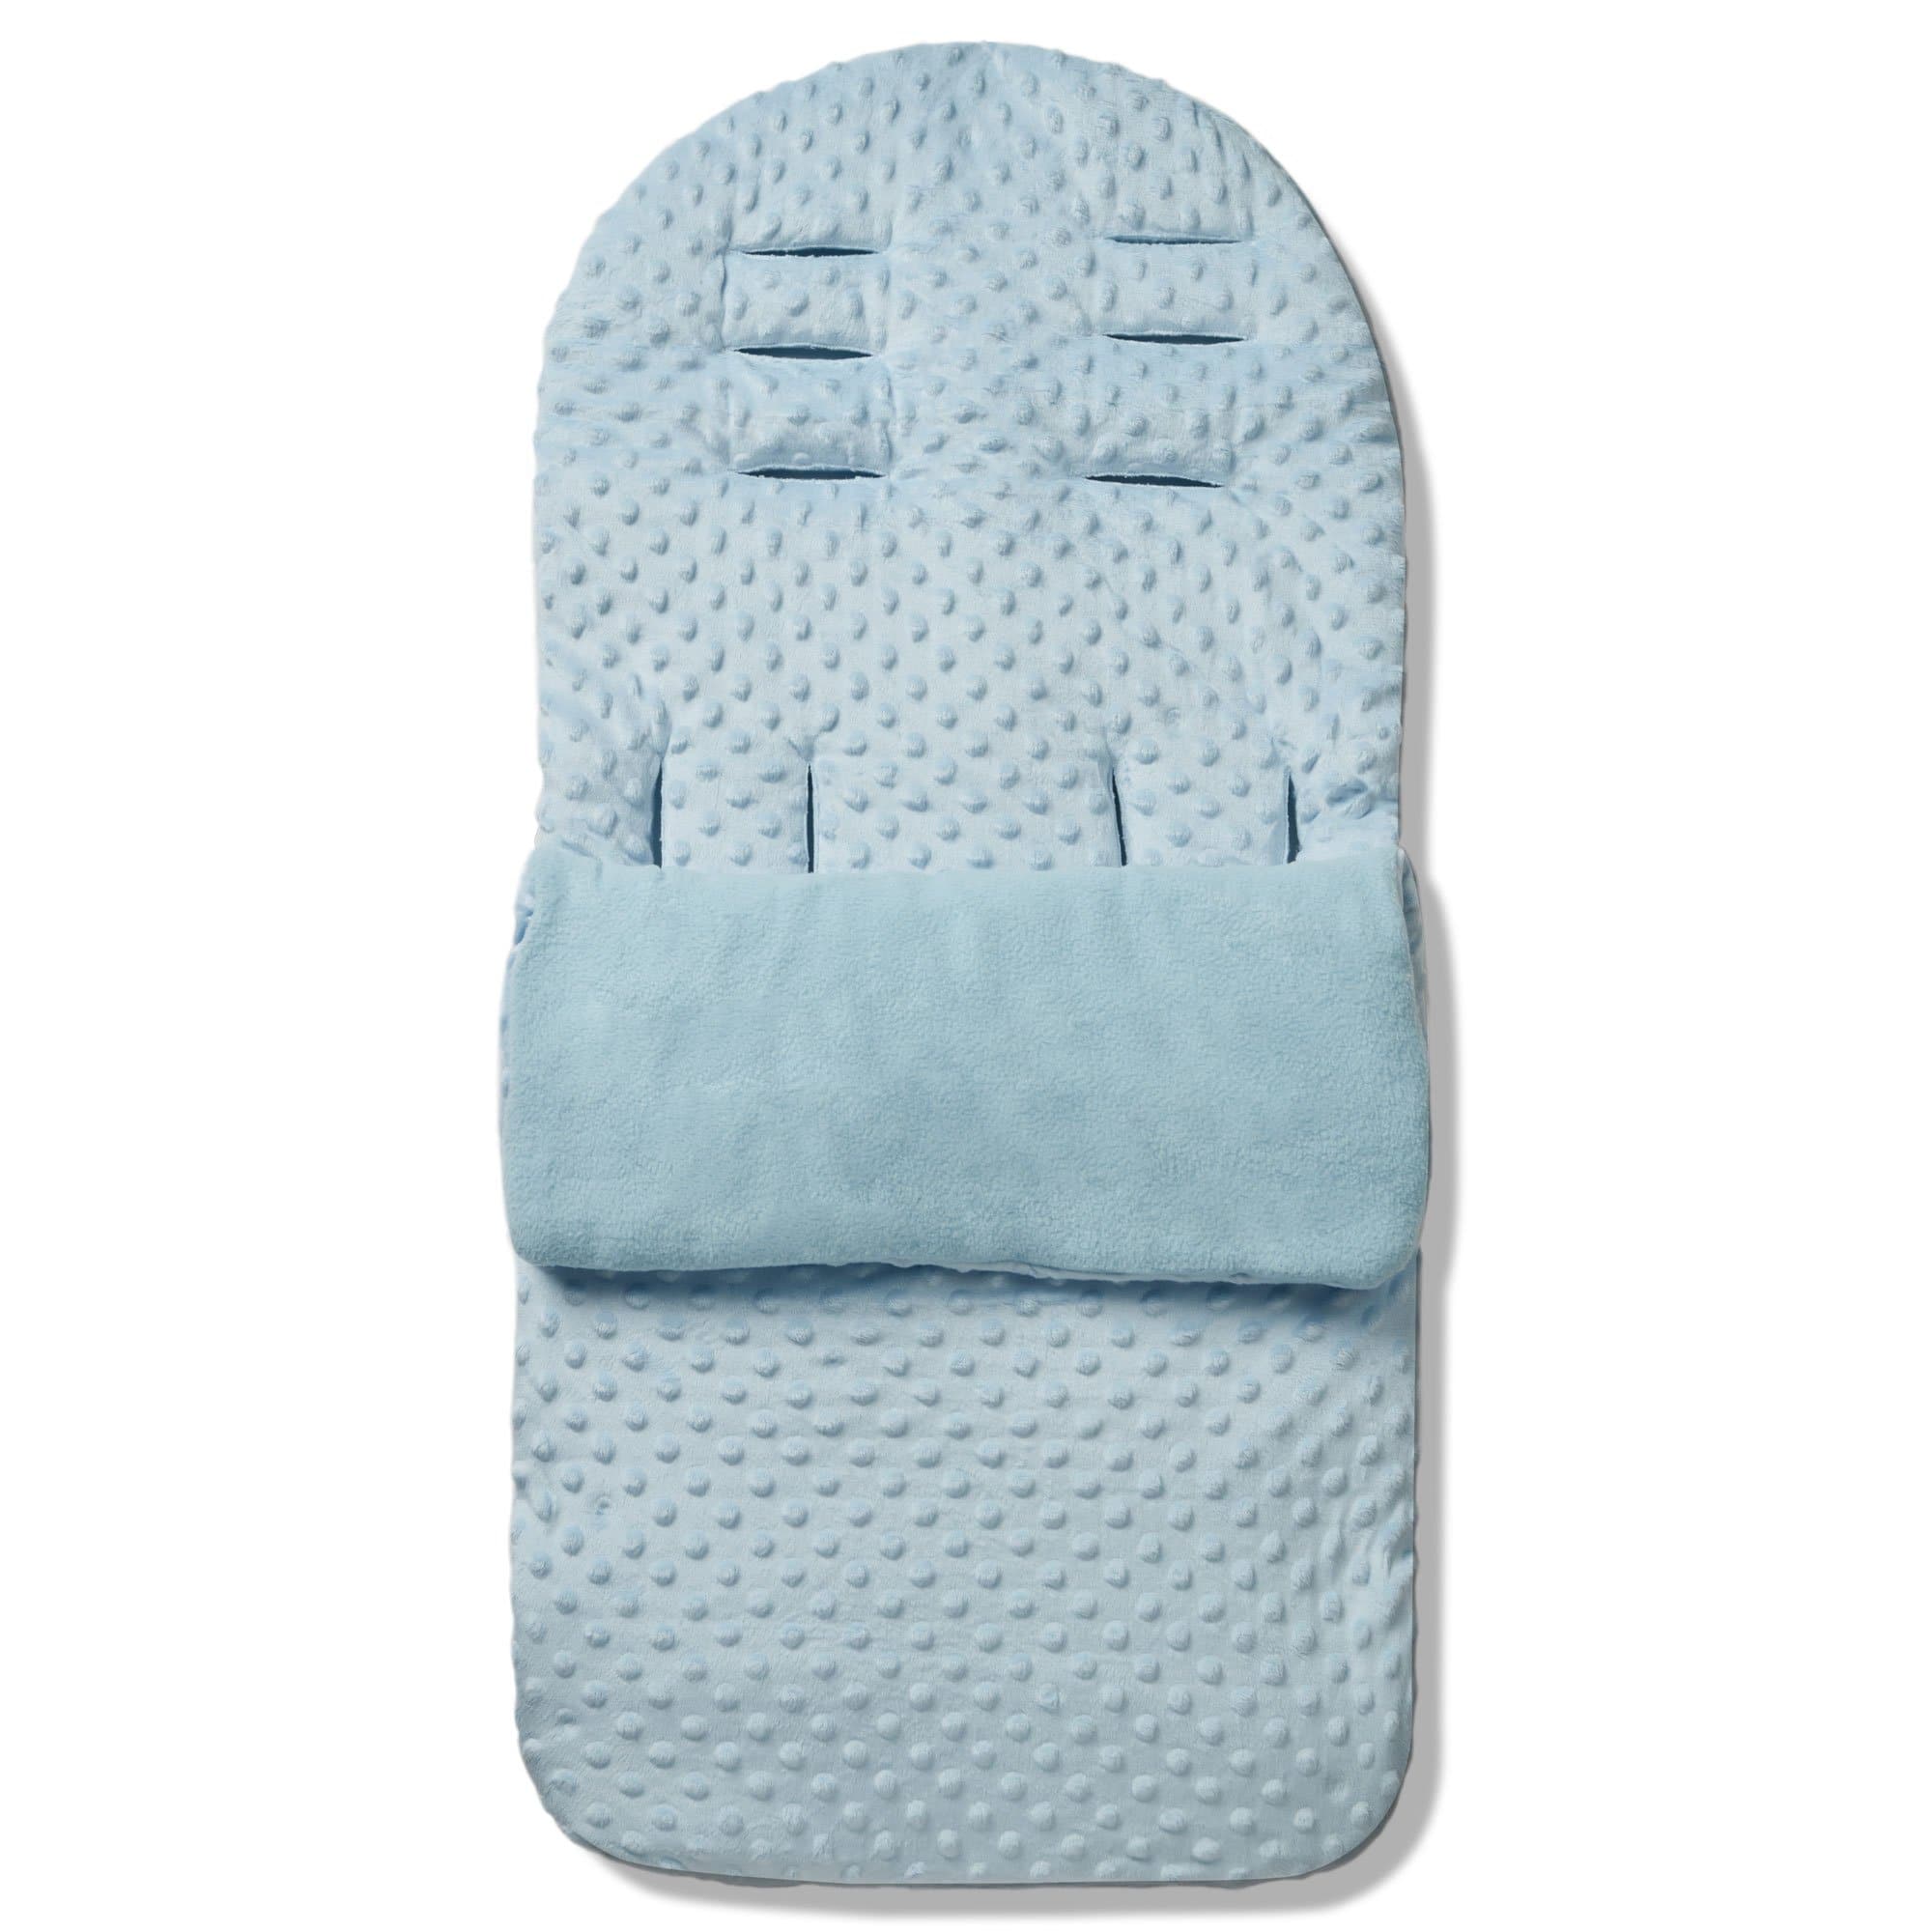 Dimple Footmuff / Cosy Toes Compatible with Petite Star - Blue / Fits All Models | For Your Little One